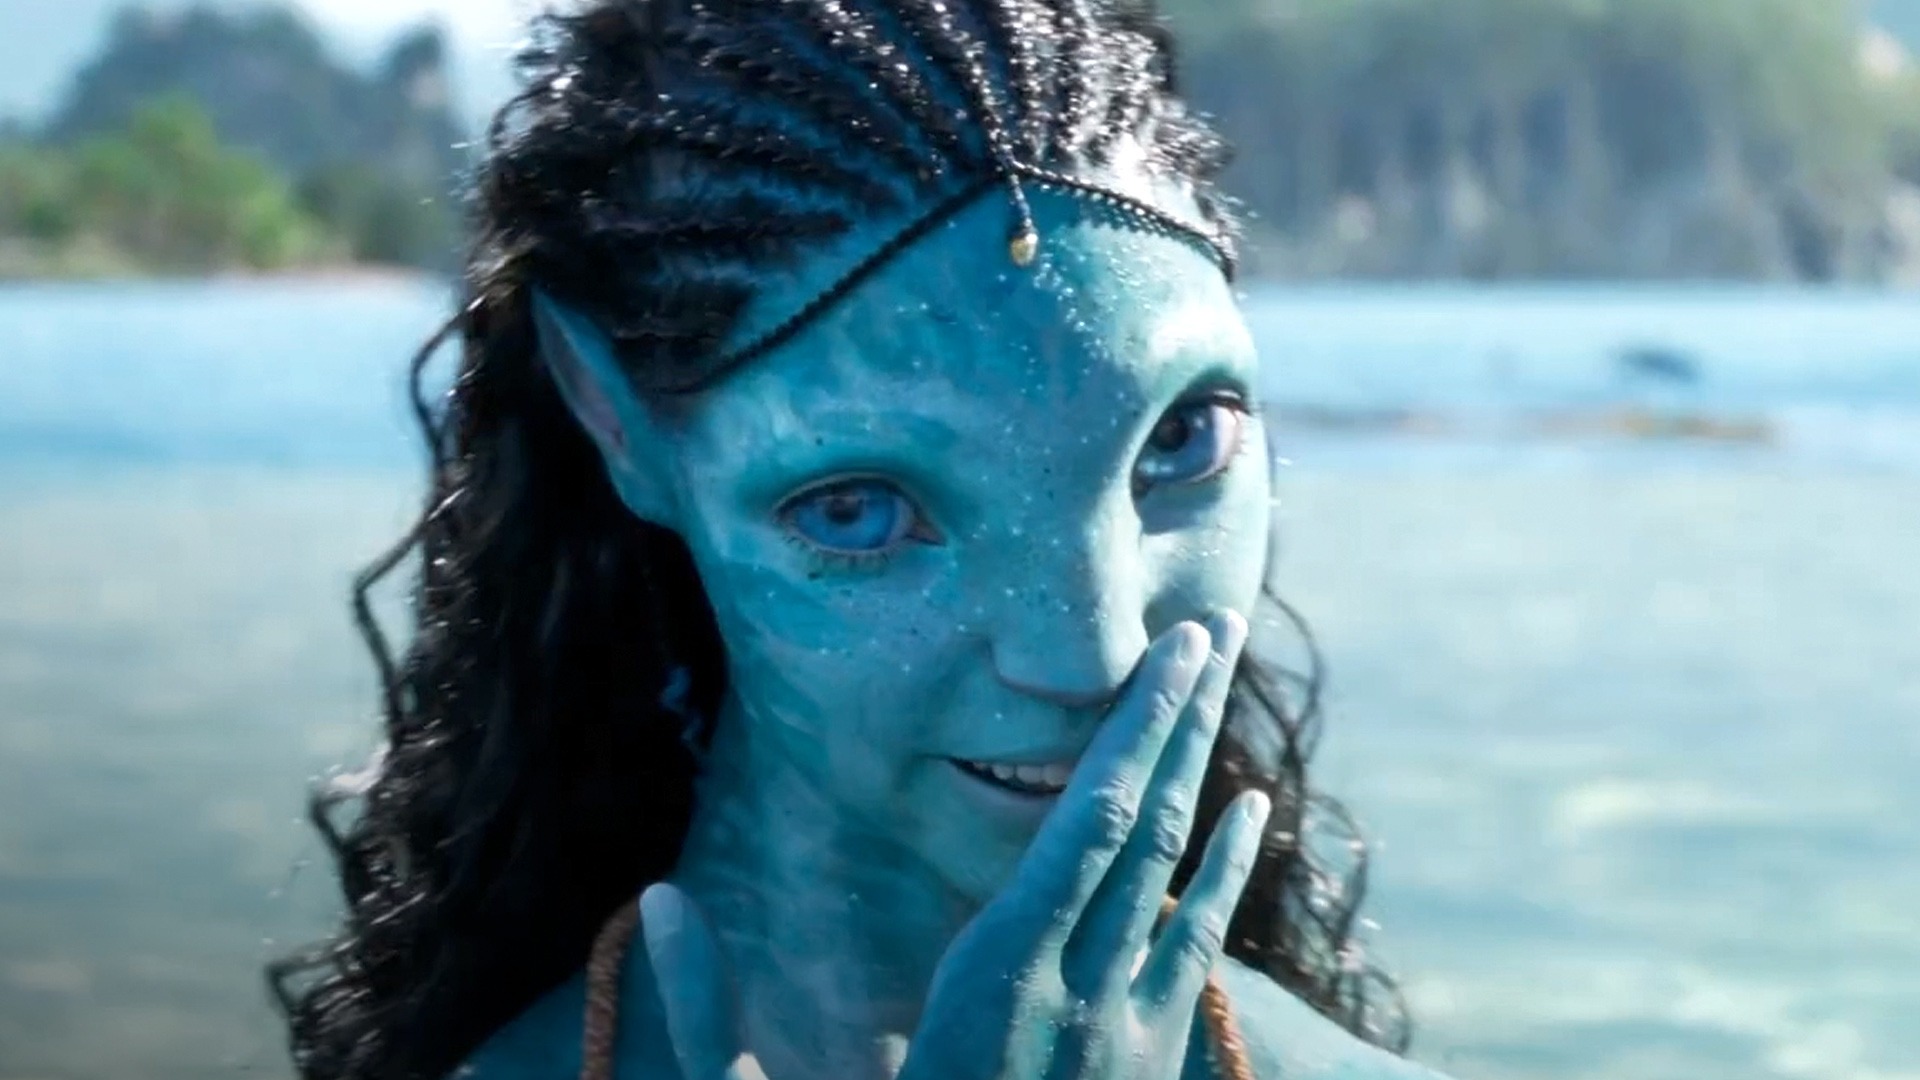 Avatar The Way of Water TV Spot Learn Your Ways Trailers & Videos